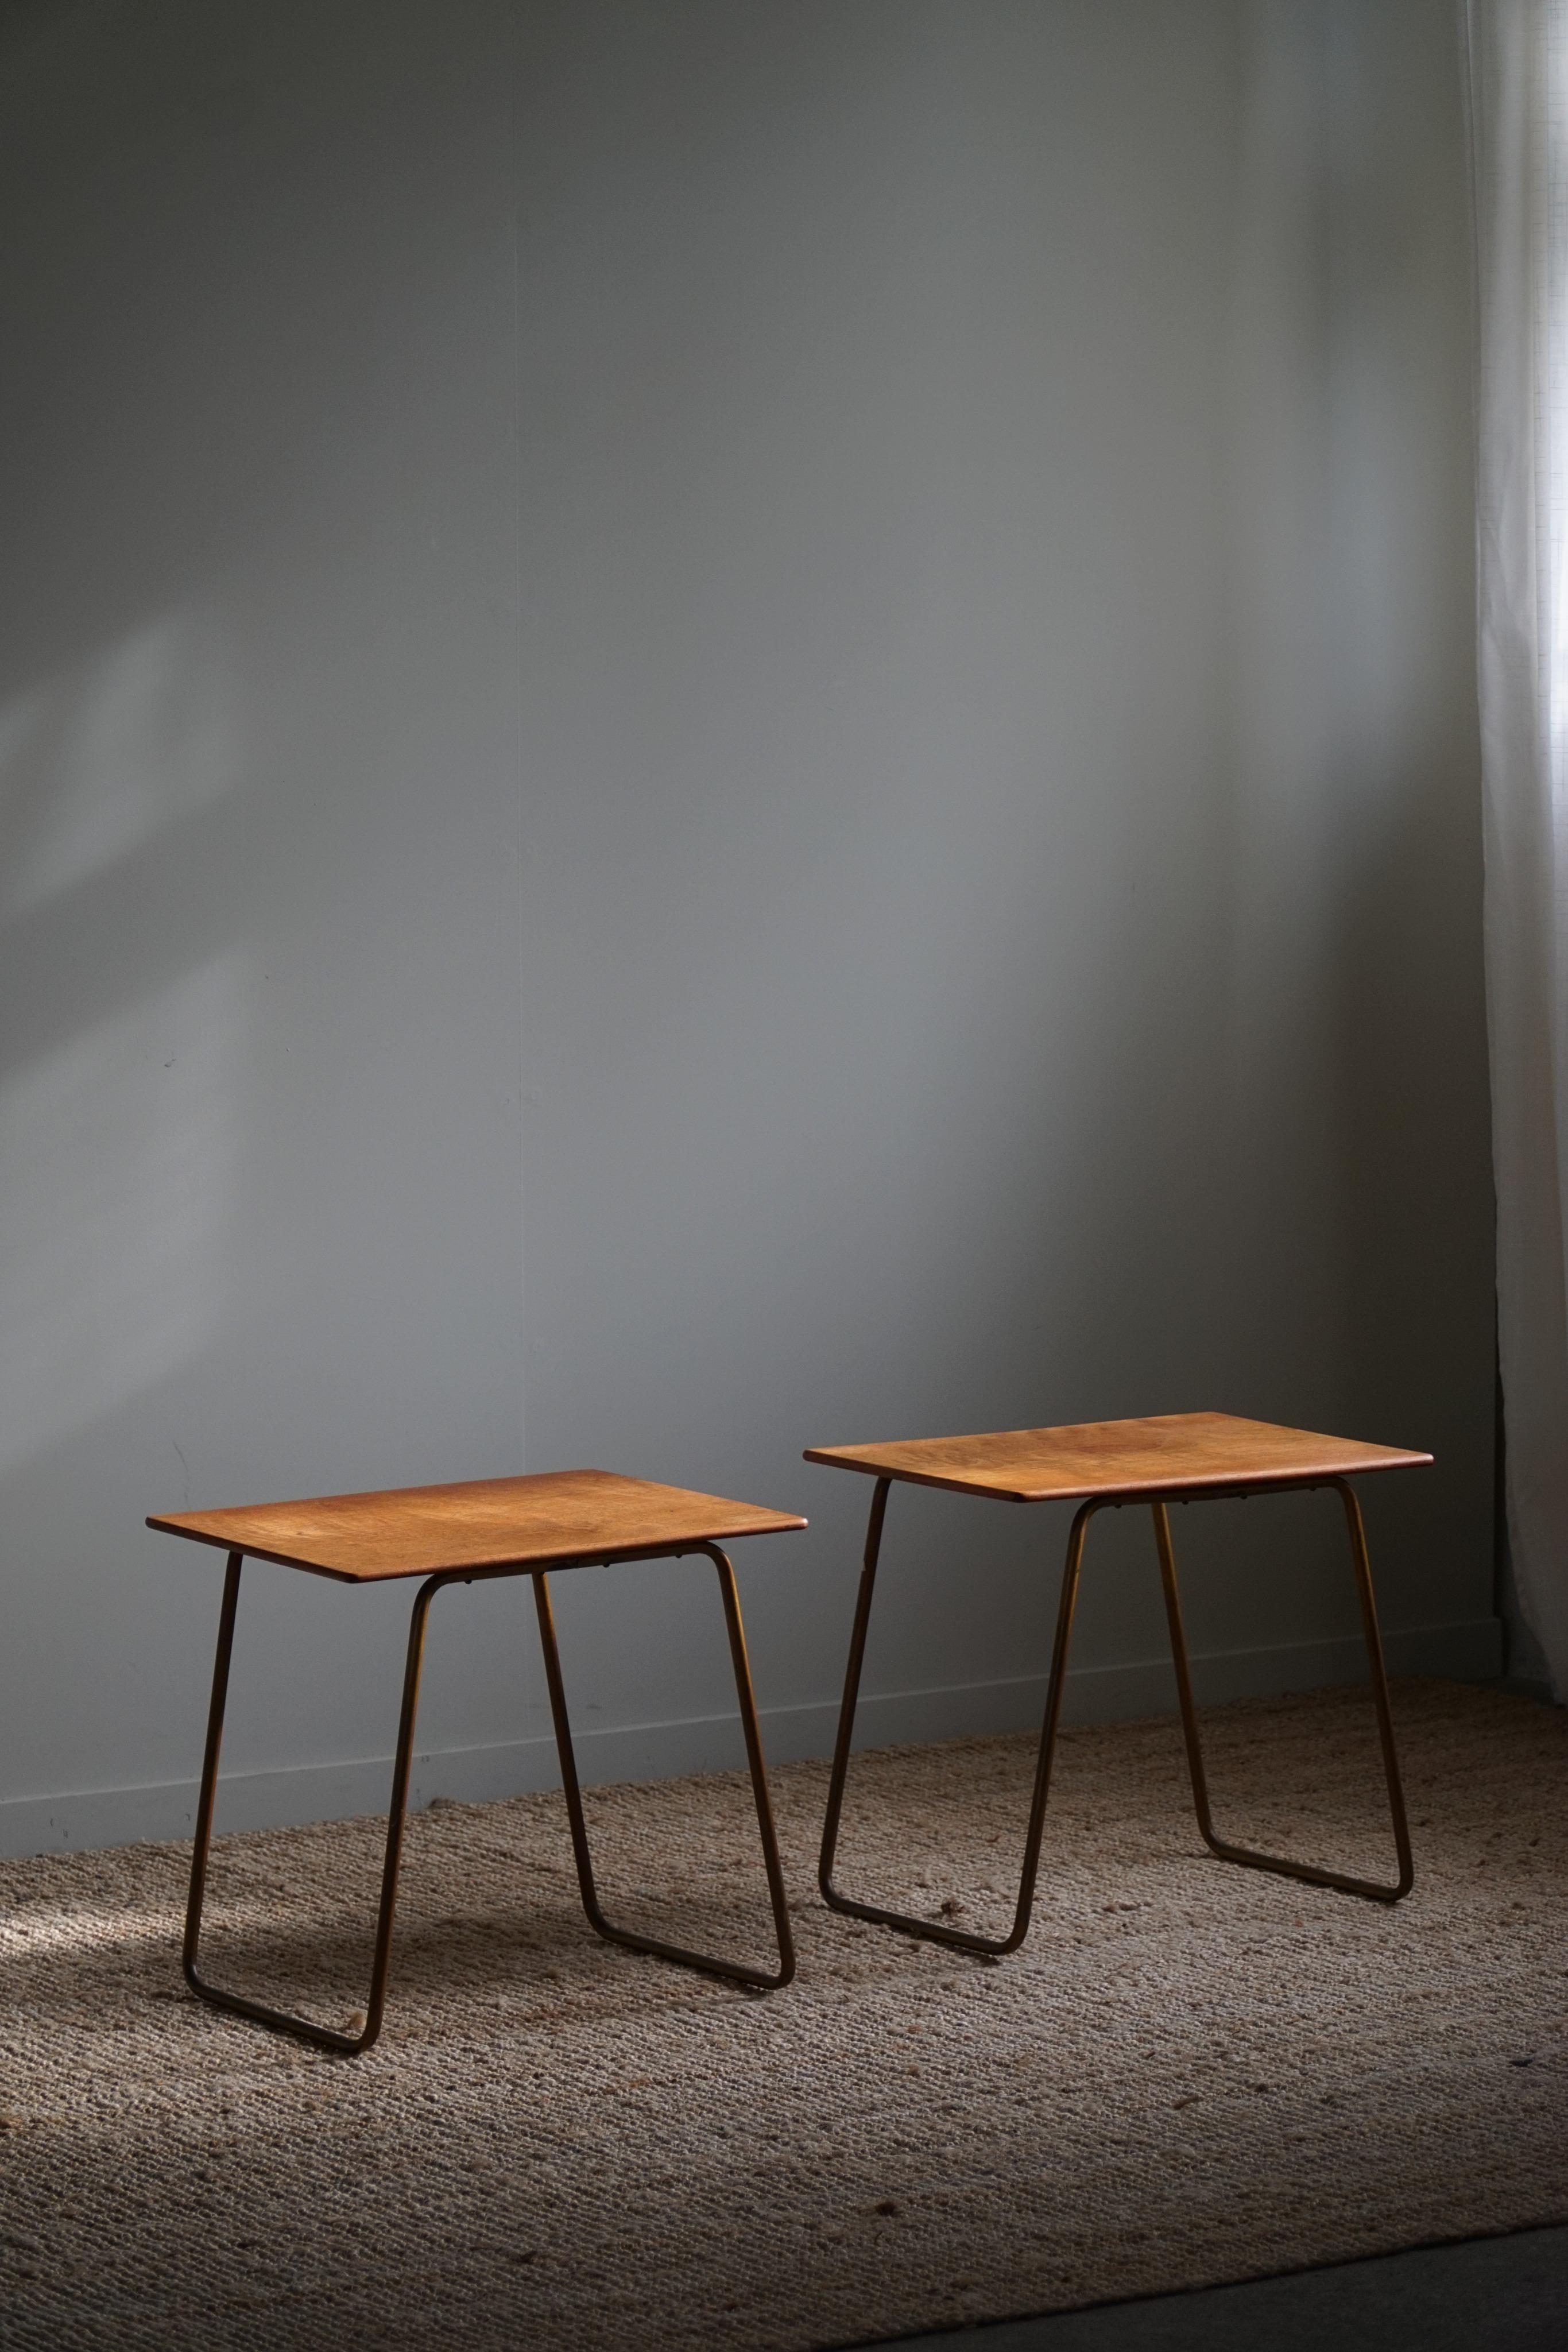 A classic and elegant pair of side tables in teak with a steel base. Made in the 1960s by a Danish cabinetmaker. 

Beautiful patina and simple lines that fit in many interior styles. A modern interior, Art Deco interior or a Classic home for